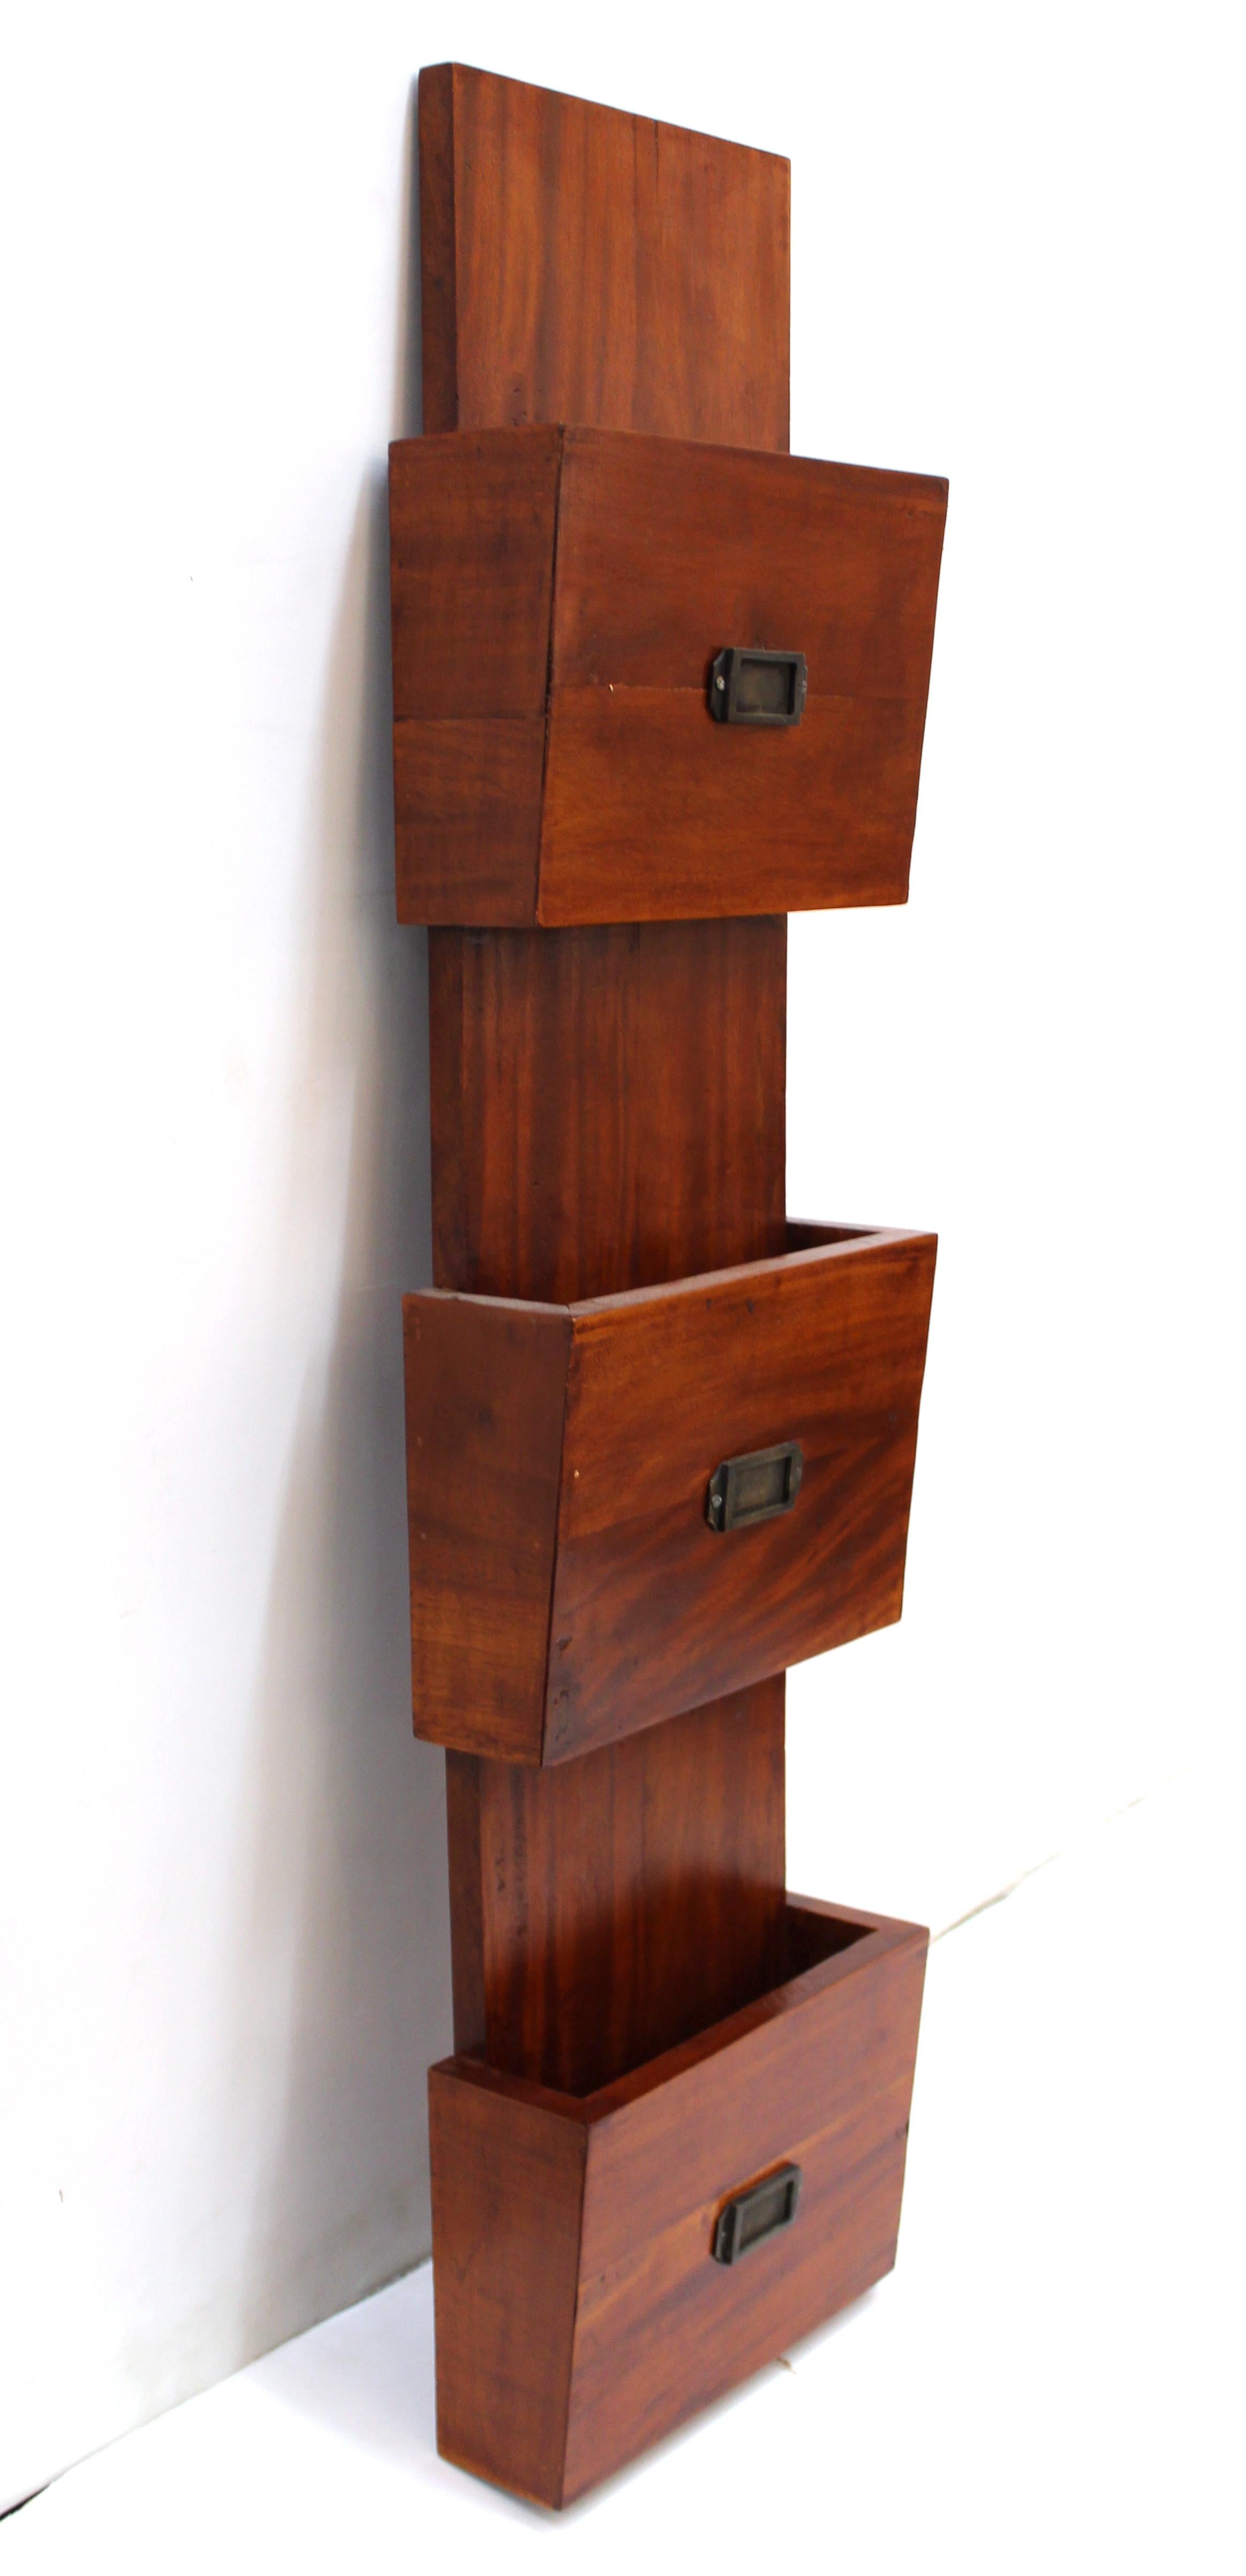 Mid-Century Modern wooden wall-mounted document holder with three separate sections for documents, each one having a metal tag holder. The piece has two hinges on the back to attach to a wall. In great vintage condition.